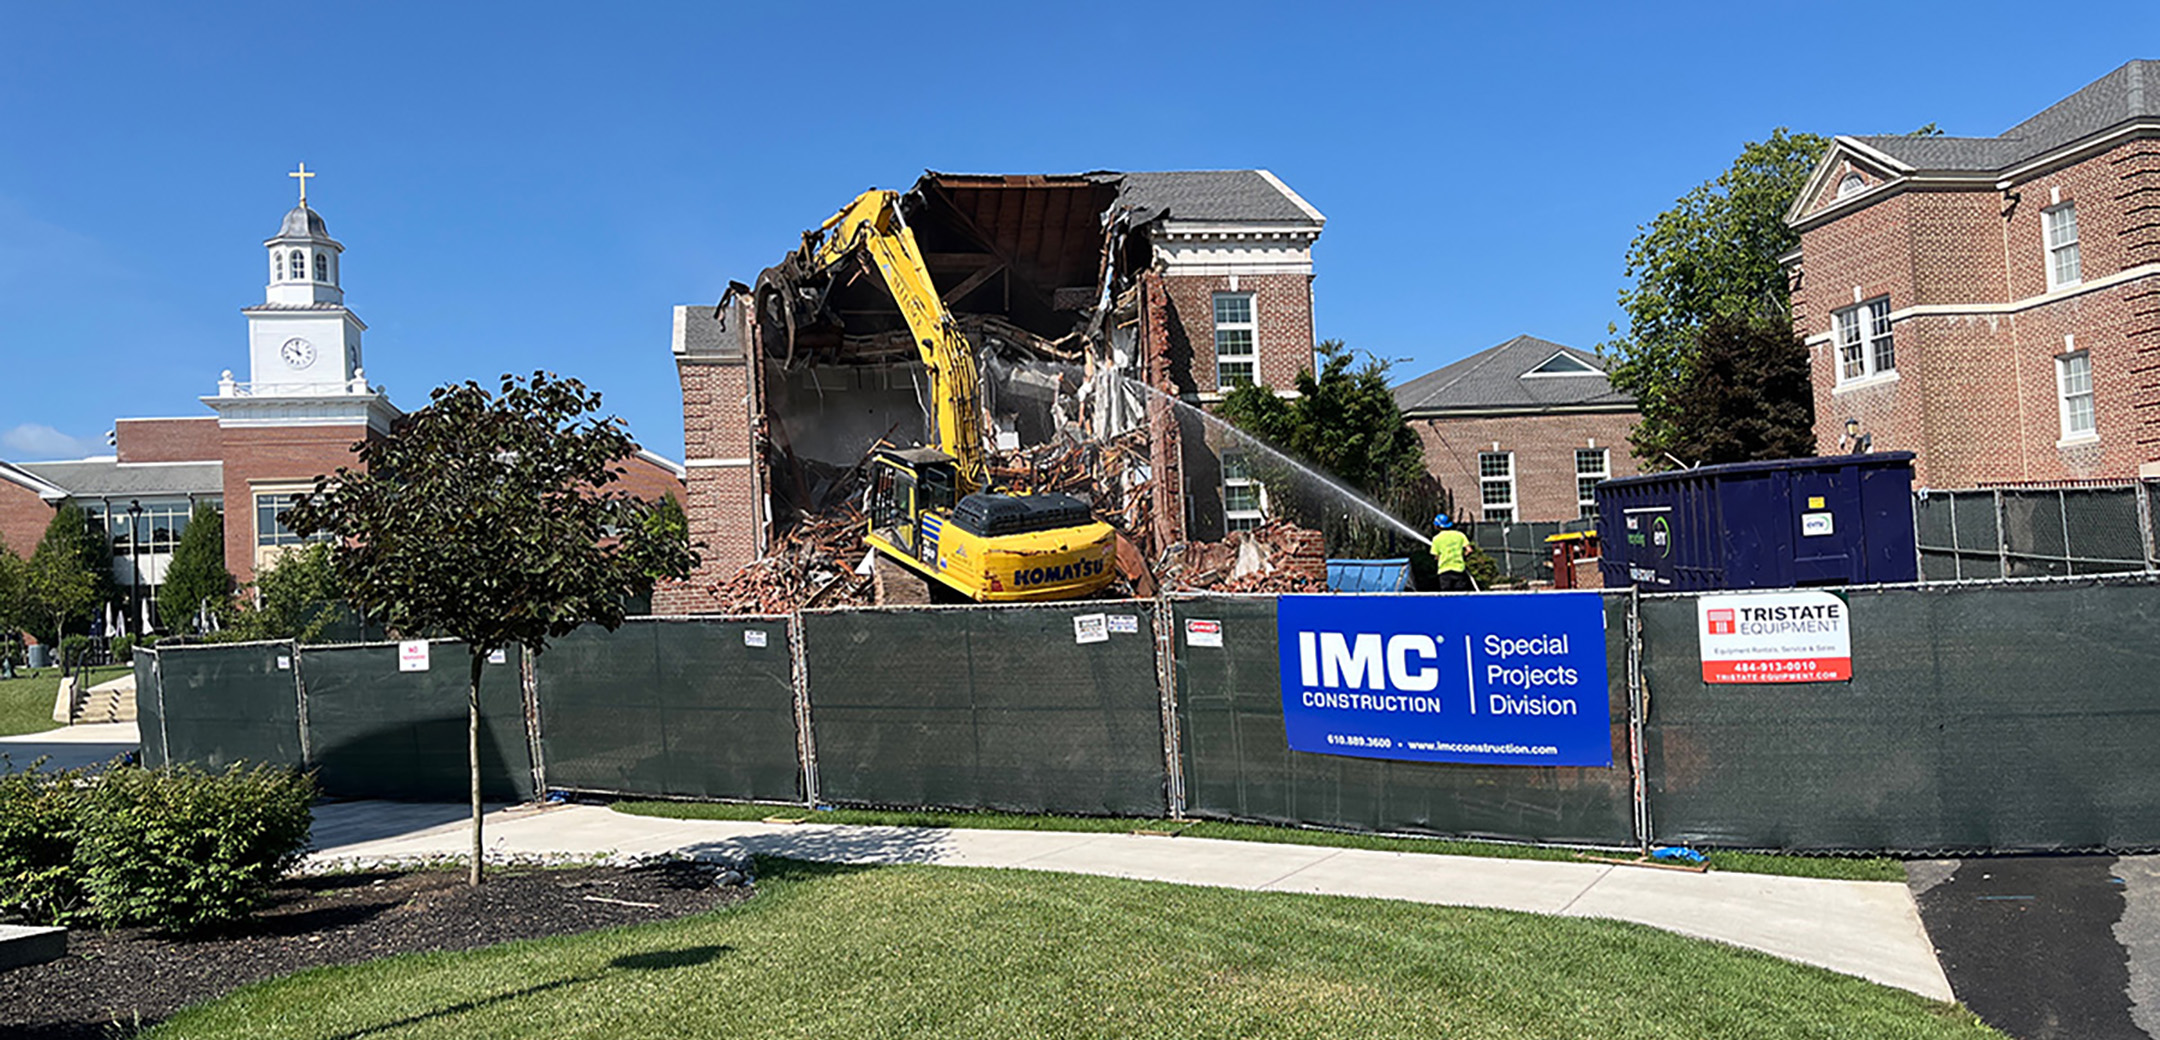 The Good Counsel Building on Malvern Preparatory's campus being being demolished with a yellow construction vehicle and green fencing enclosing the project site